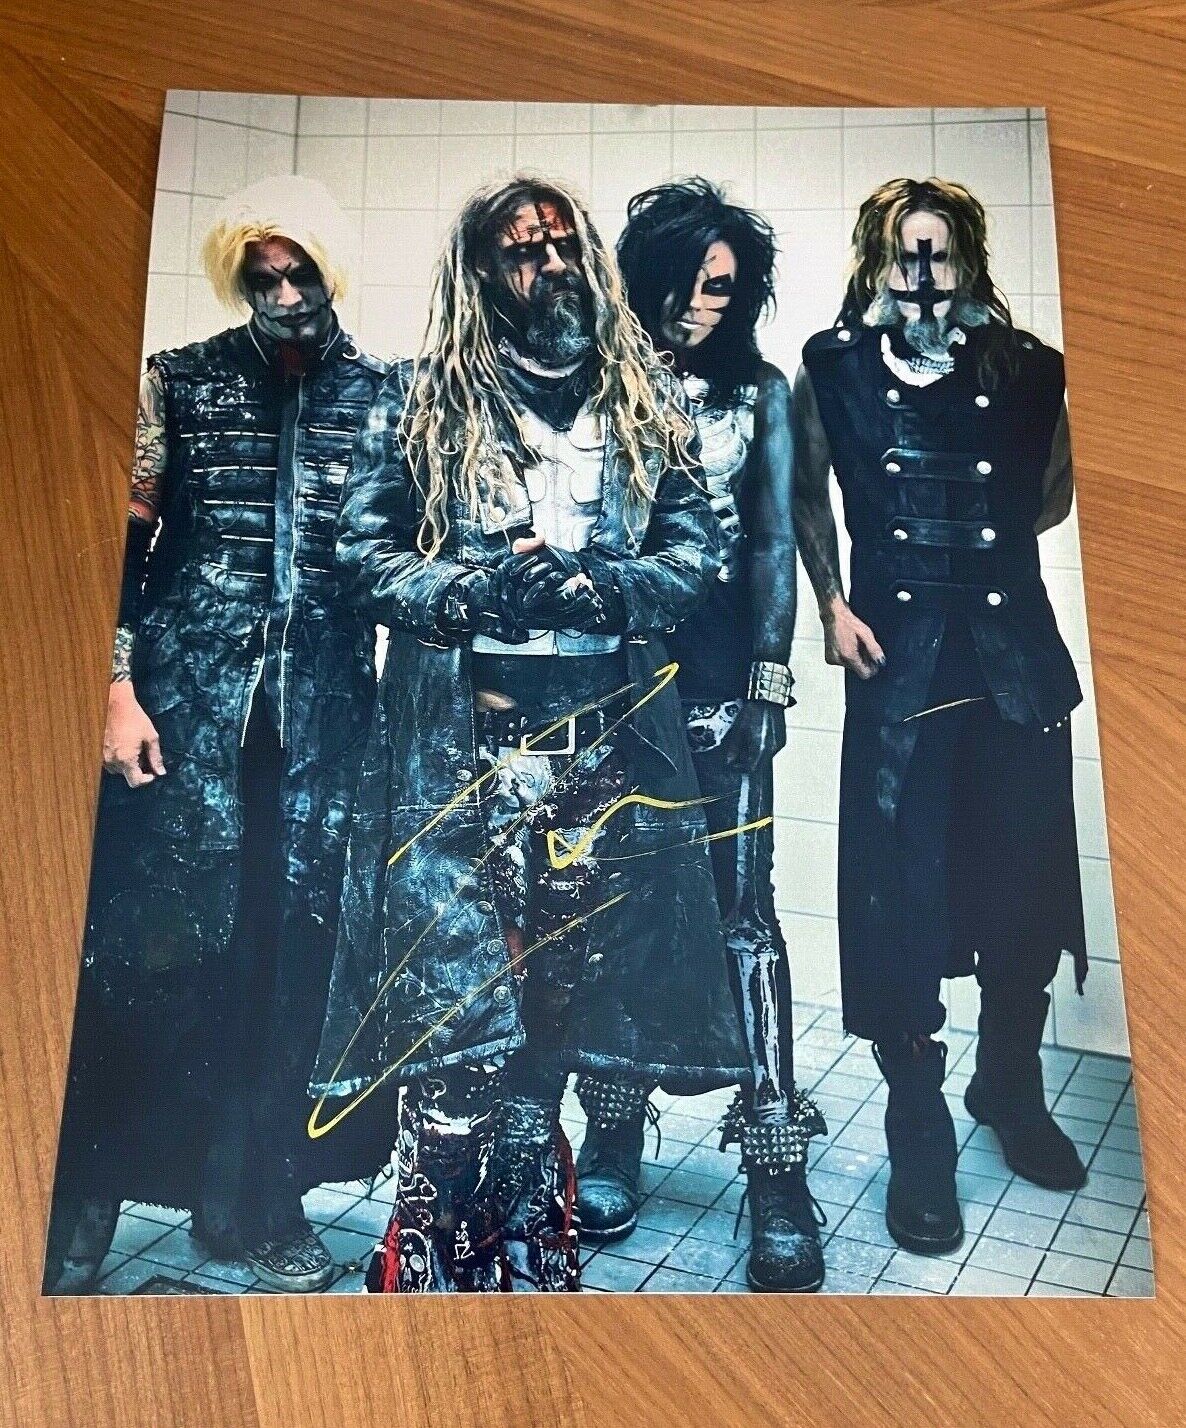 * ROB ZOMBIE * signed autographed 11x14 Photo Poster painting * ROB ZOMBIE BAND * COA * 2